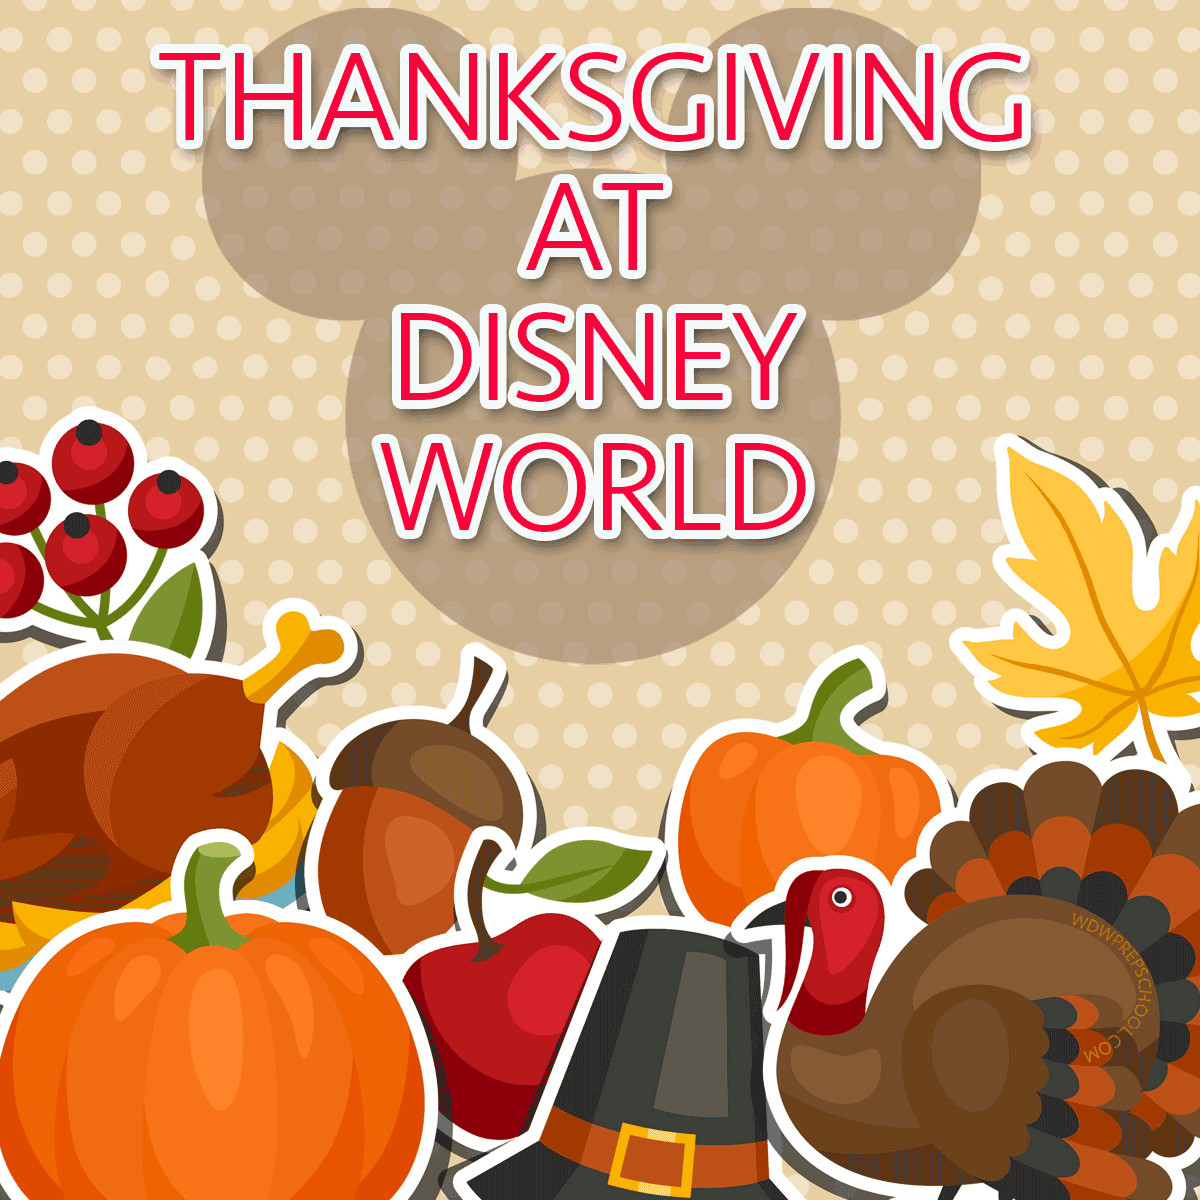 Thanksgiving Quotes Disney
 Tips for Thanksgiving at Disney World in 2017